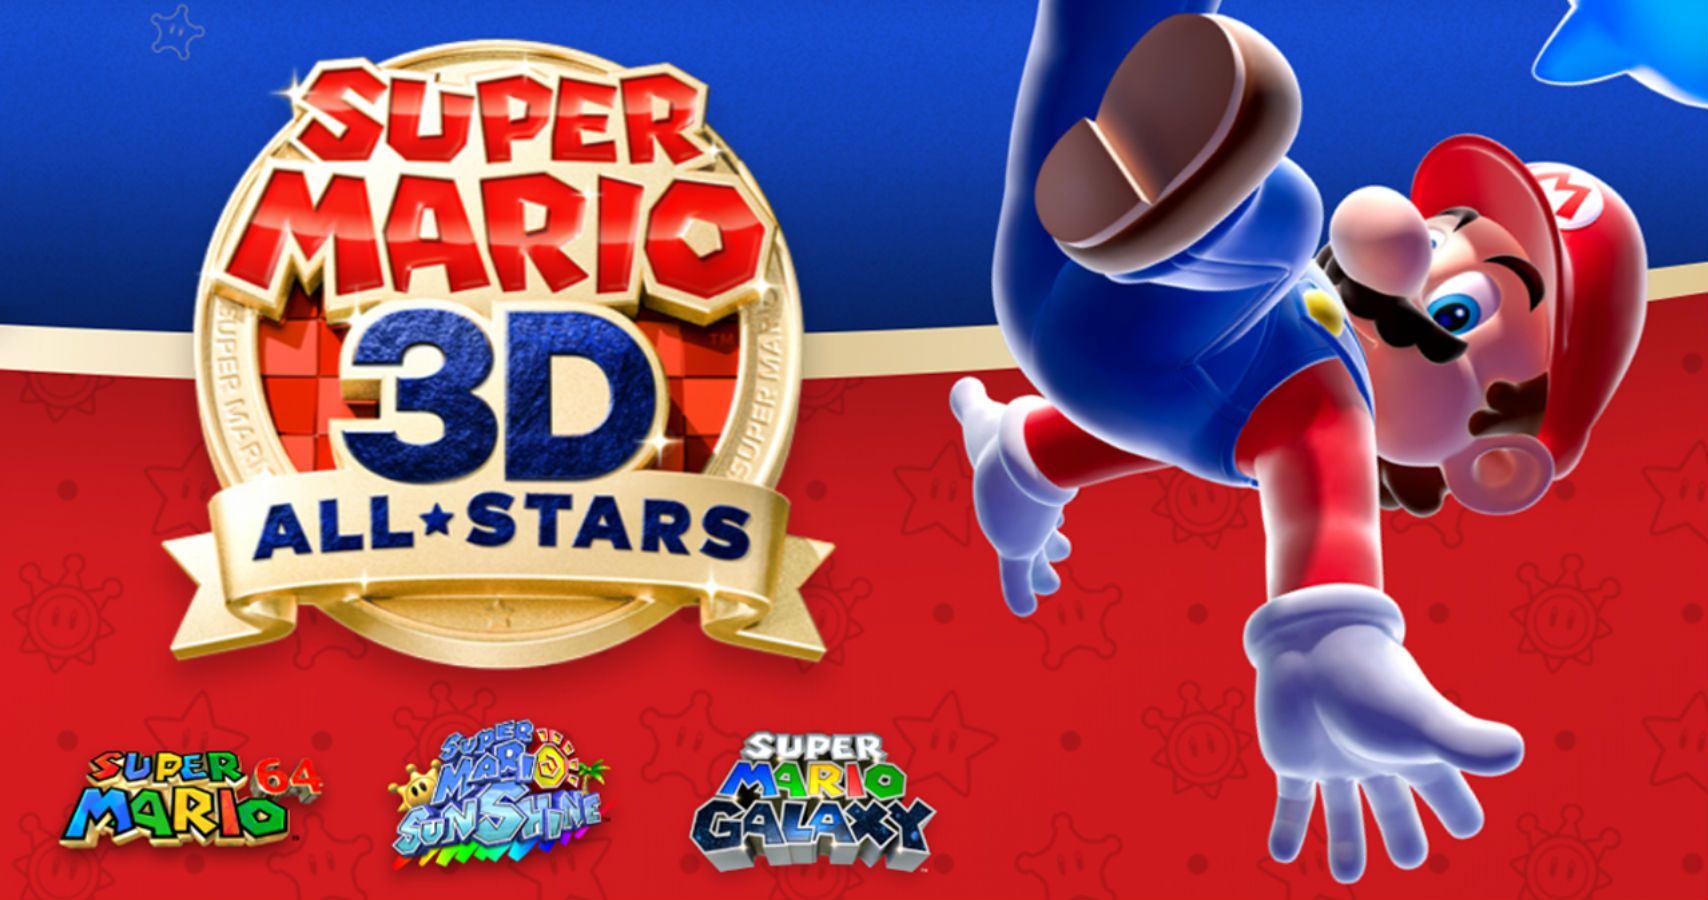 Super Mario 3D All Stars Is Already The SecondBest Selling Game Of 2020 On Amazon